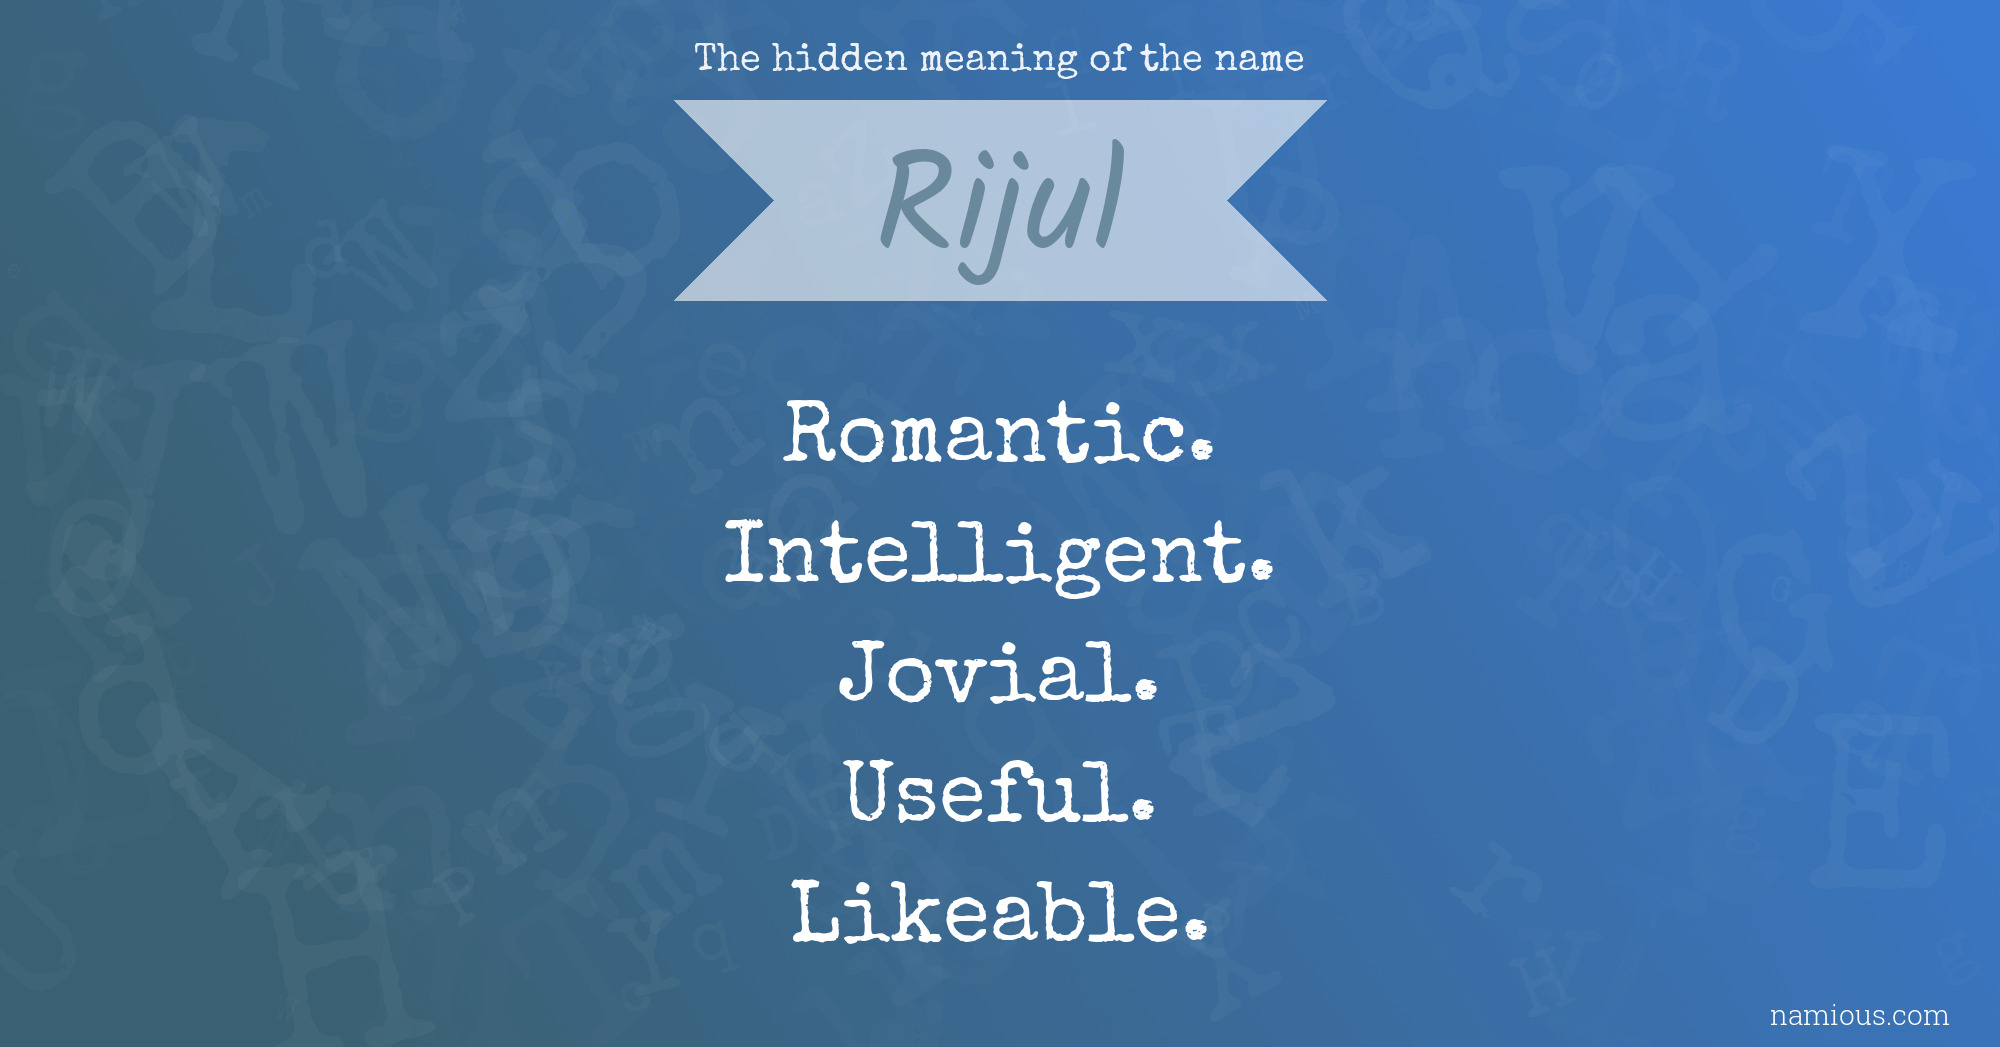 The hidden meaning of the name Rijul